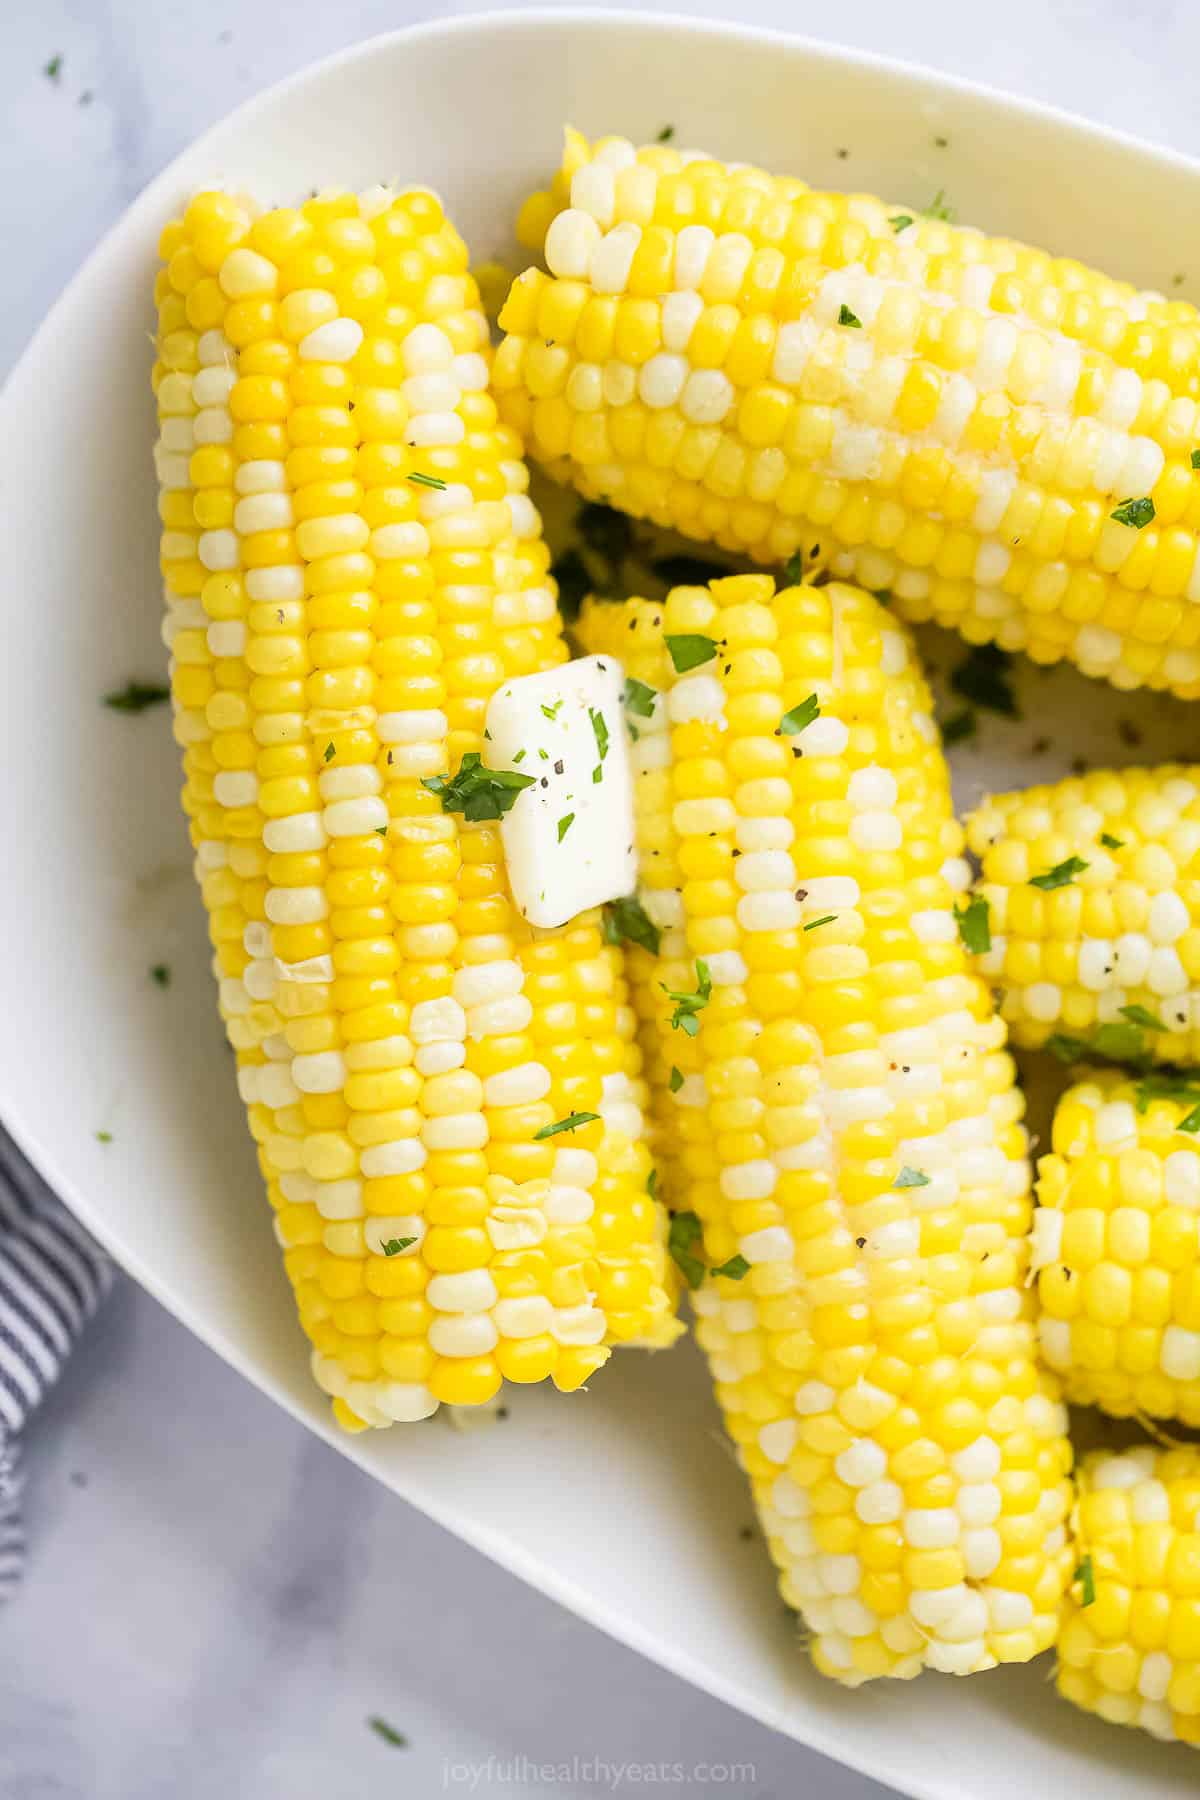 Pressure cooker corn on the cob topped with a pat of butter and a sprinkle of chopped herbs